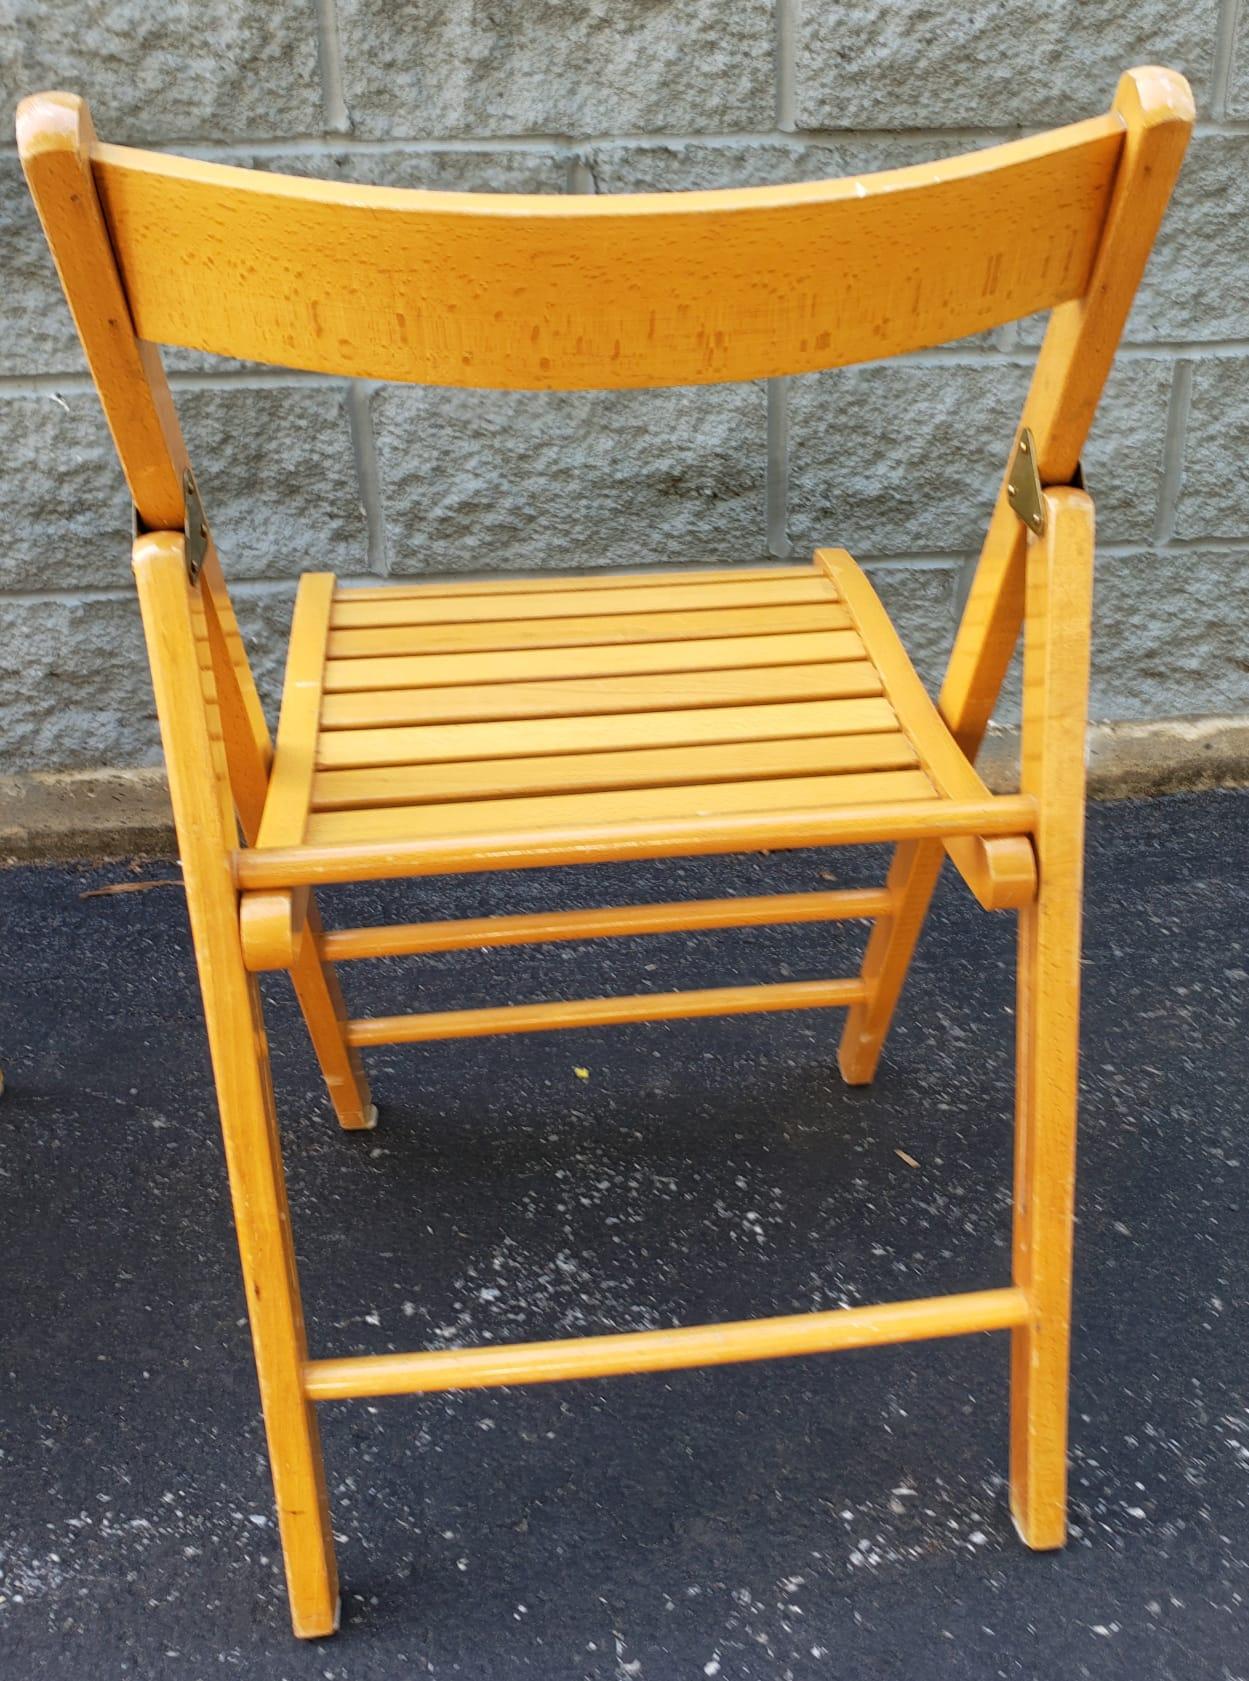 Set Of Four Italian Maple Folding Chairs in good vintage condition.

